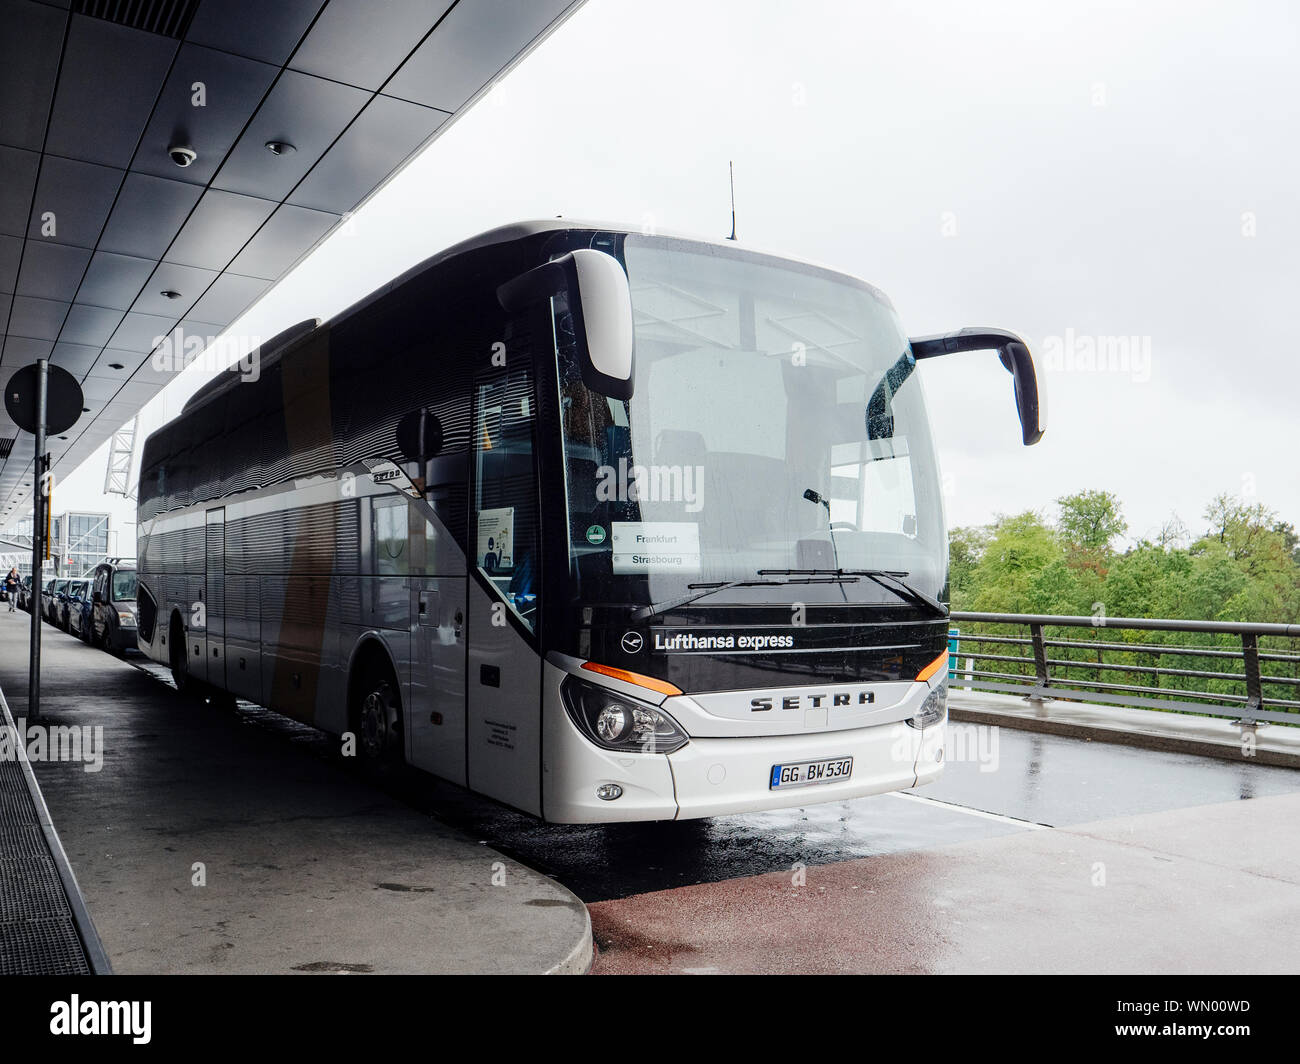 Coach Parking High Resolution Stock Photography and Images - Alamy